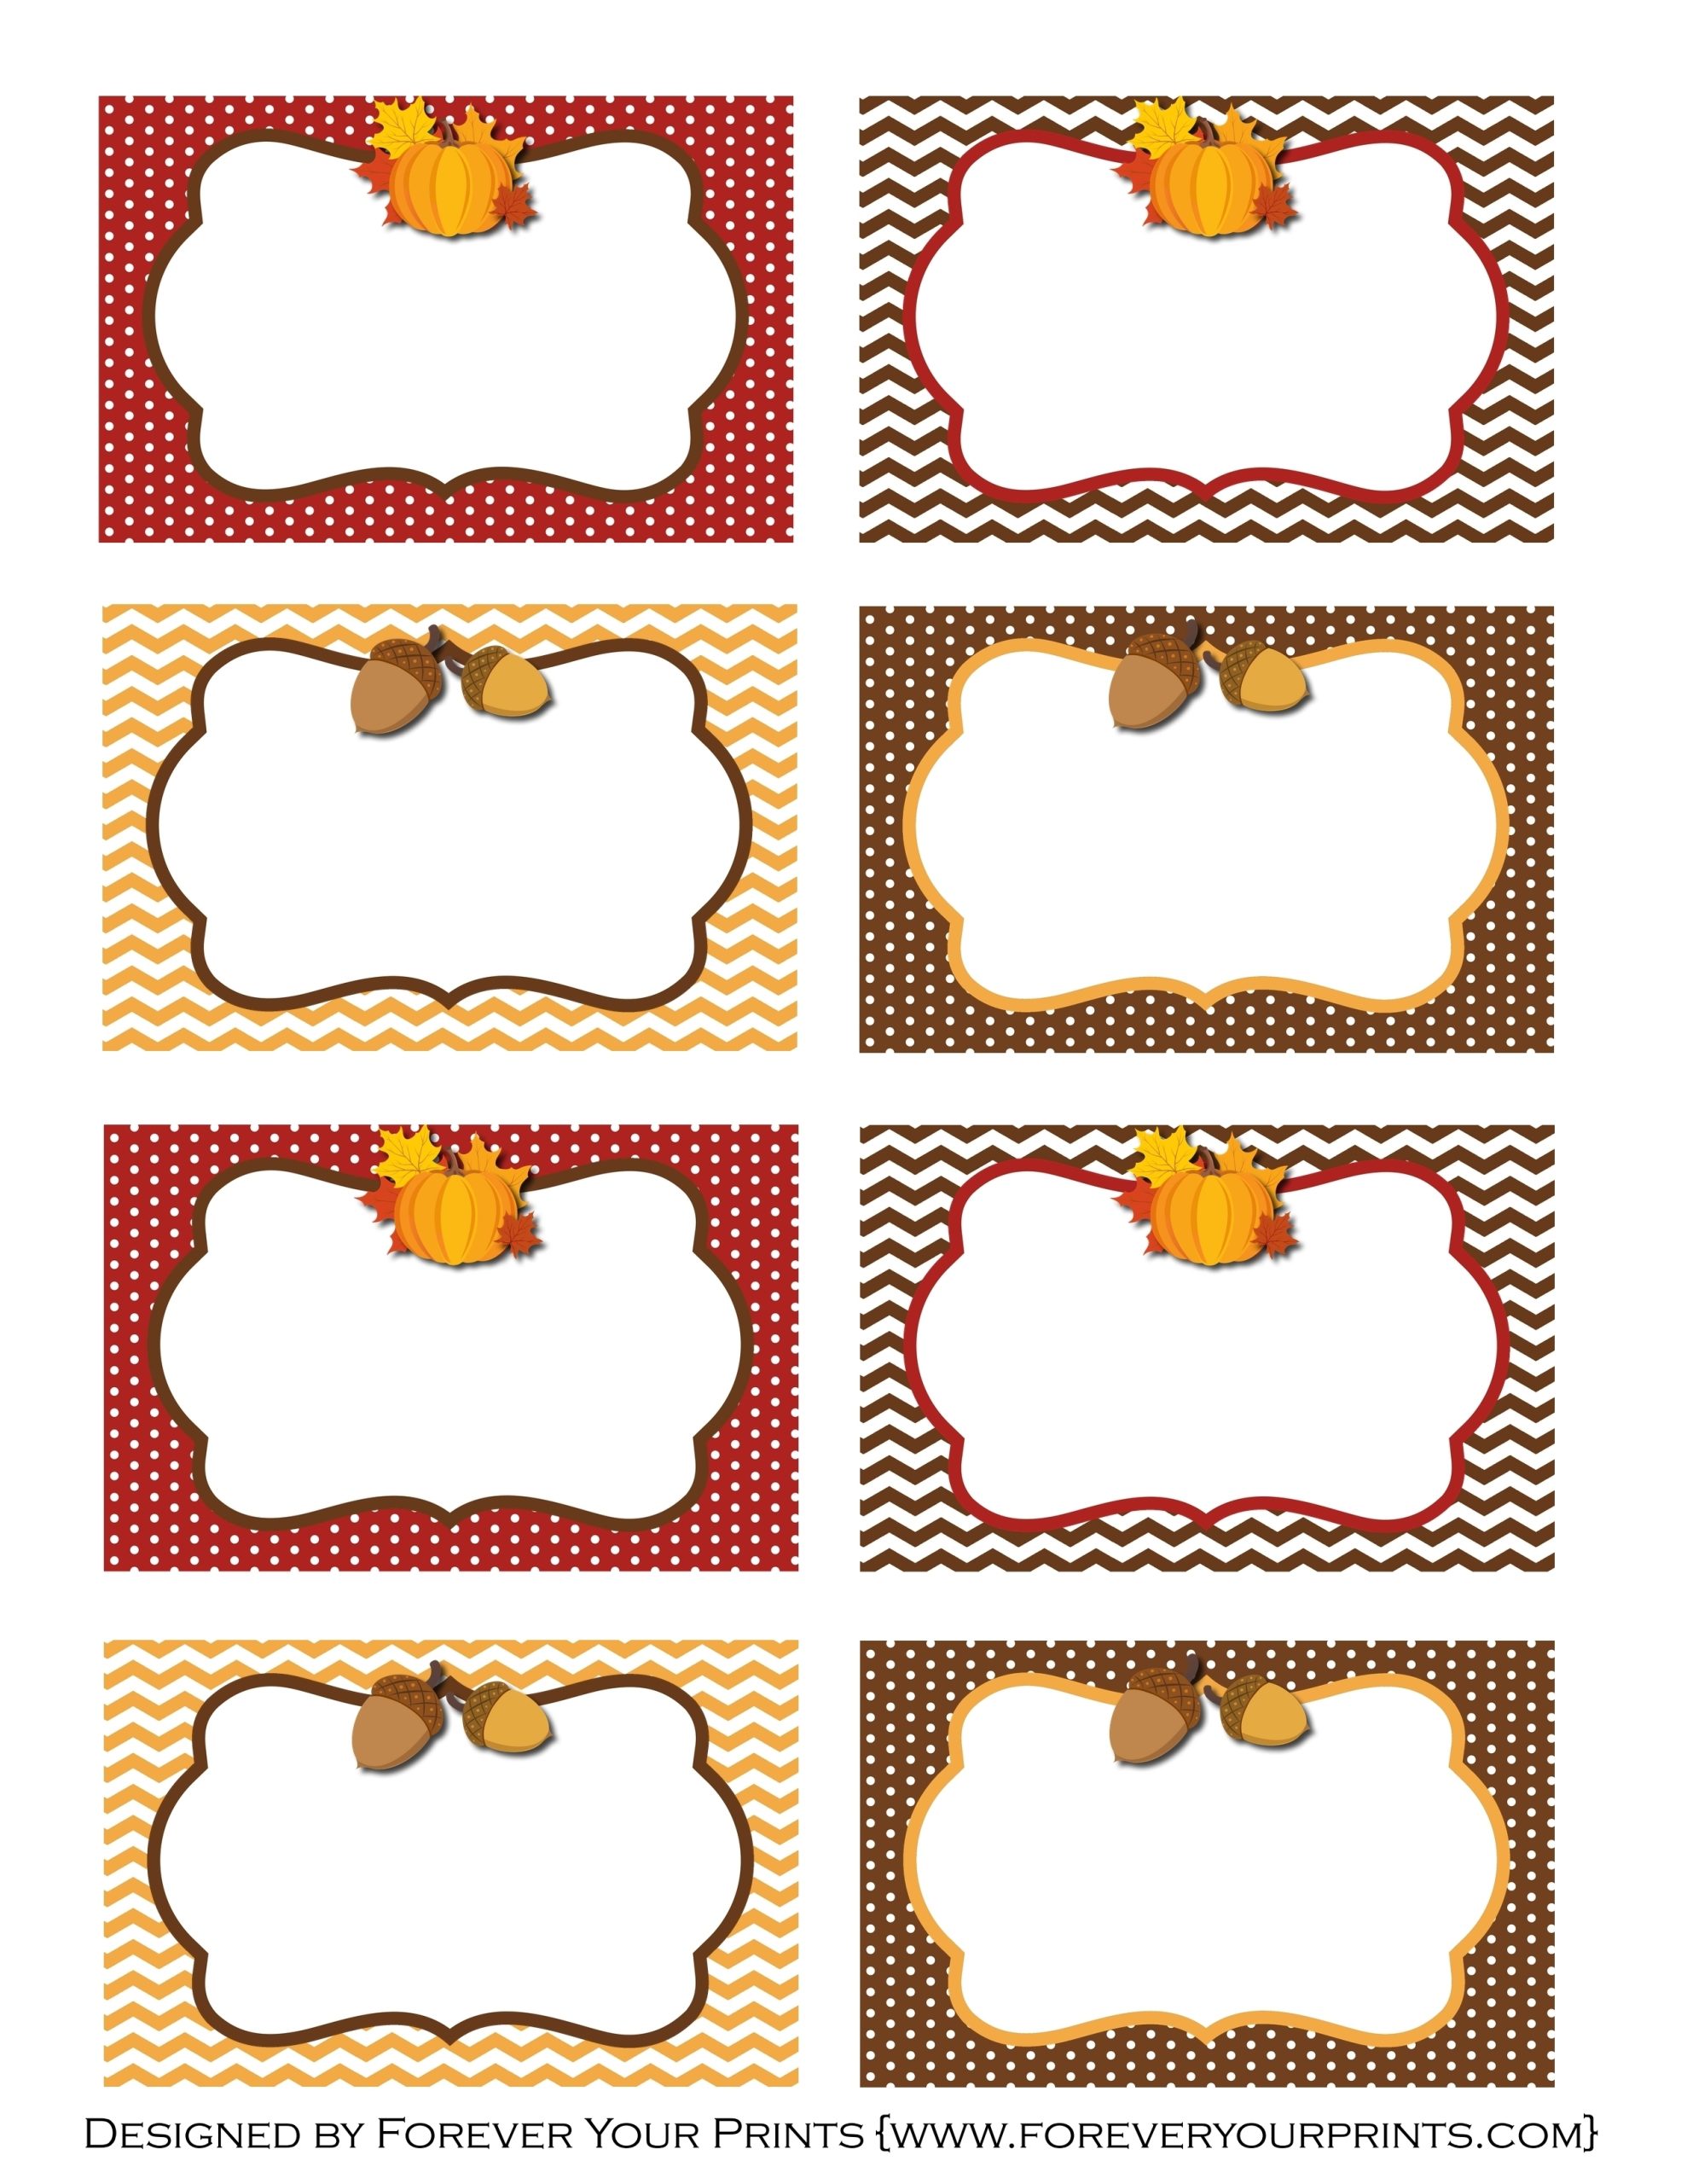 Free Thanksgiving Printables From Forever Your Prints | Catch My Party With Celebrate It Templates Place Cards